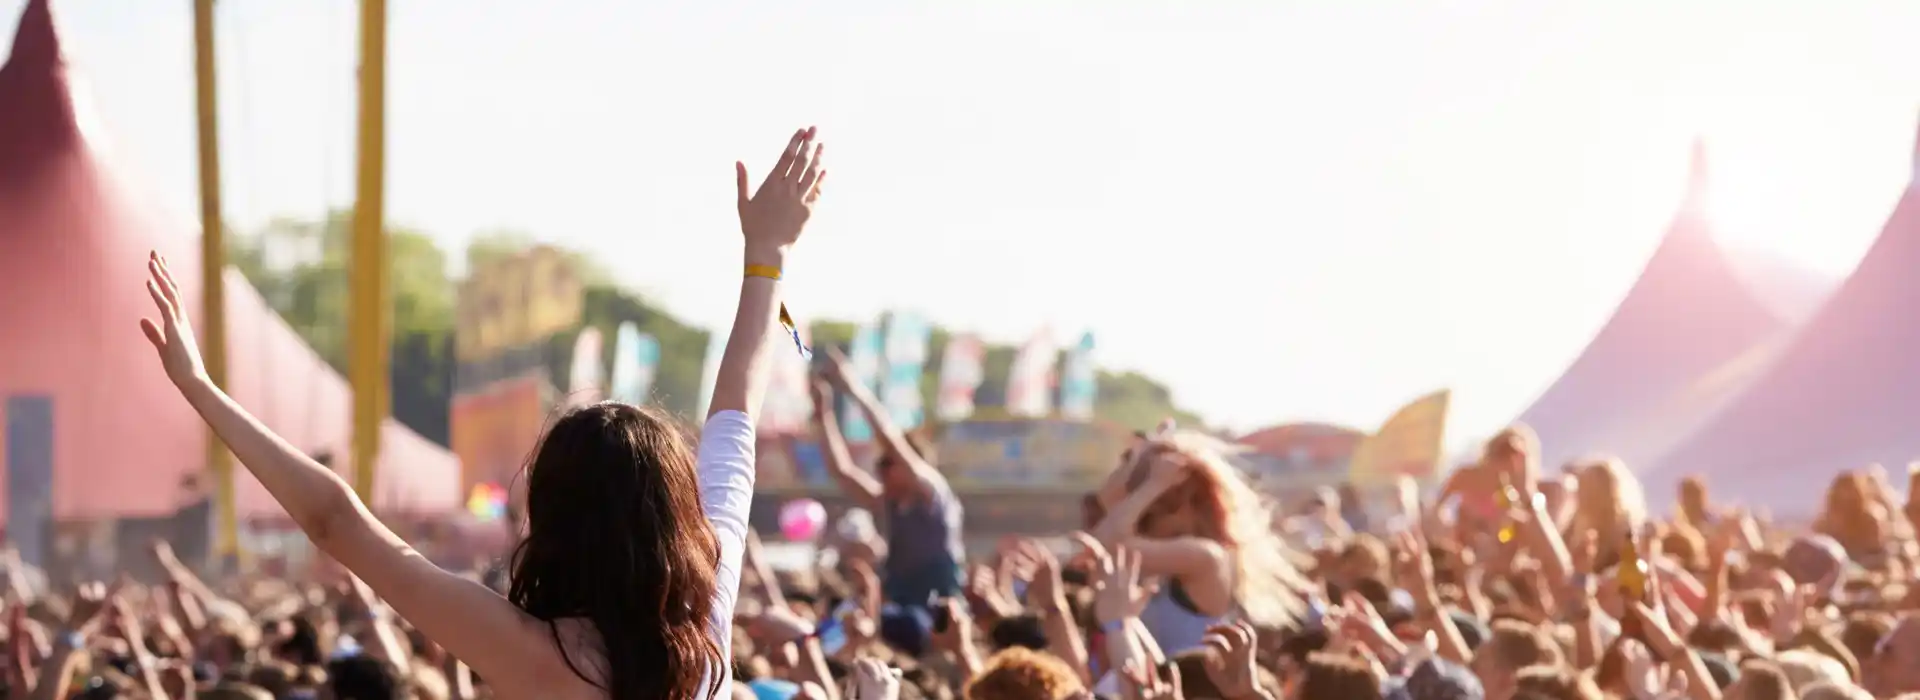 25 things at festivals